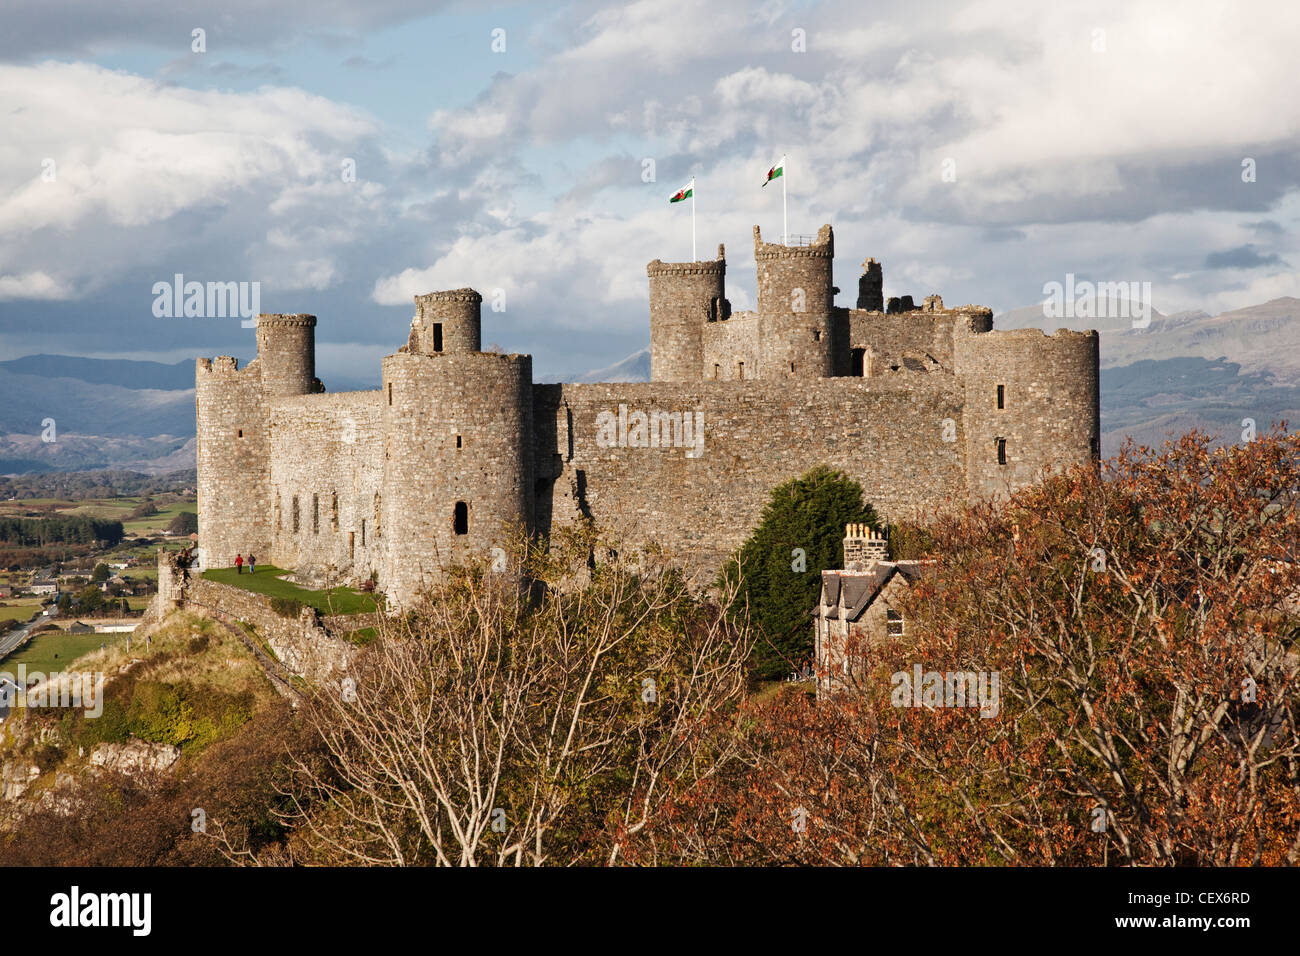 Harlech Castle, built by King Edward l in the late 13th century as one of his 'iron ring' of fortresses. Stock Photo